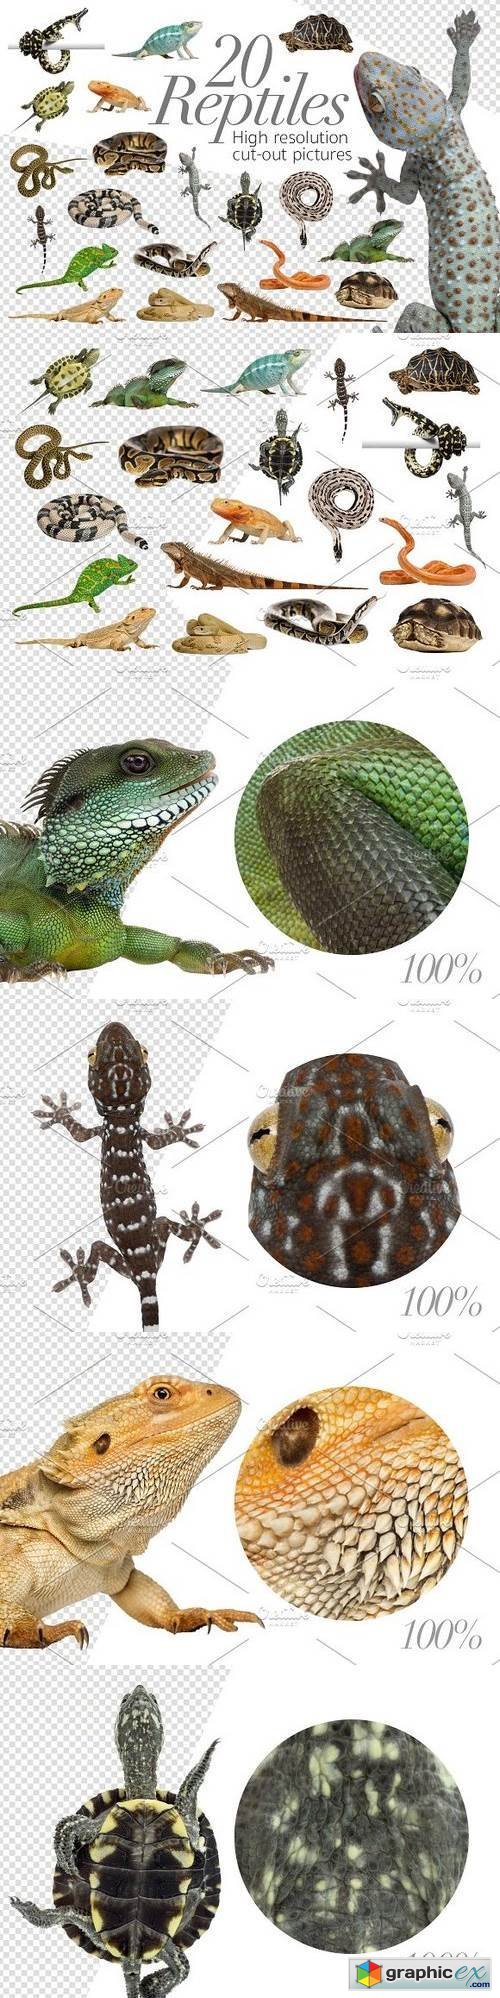 20 Reptiles - Cut-out Pictures